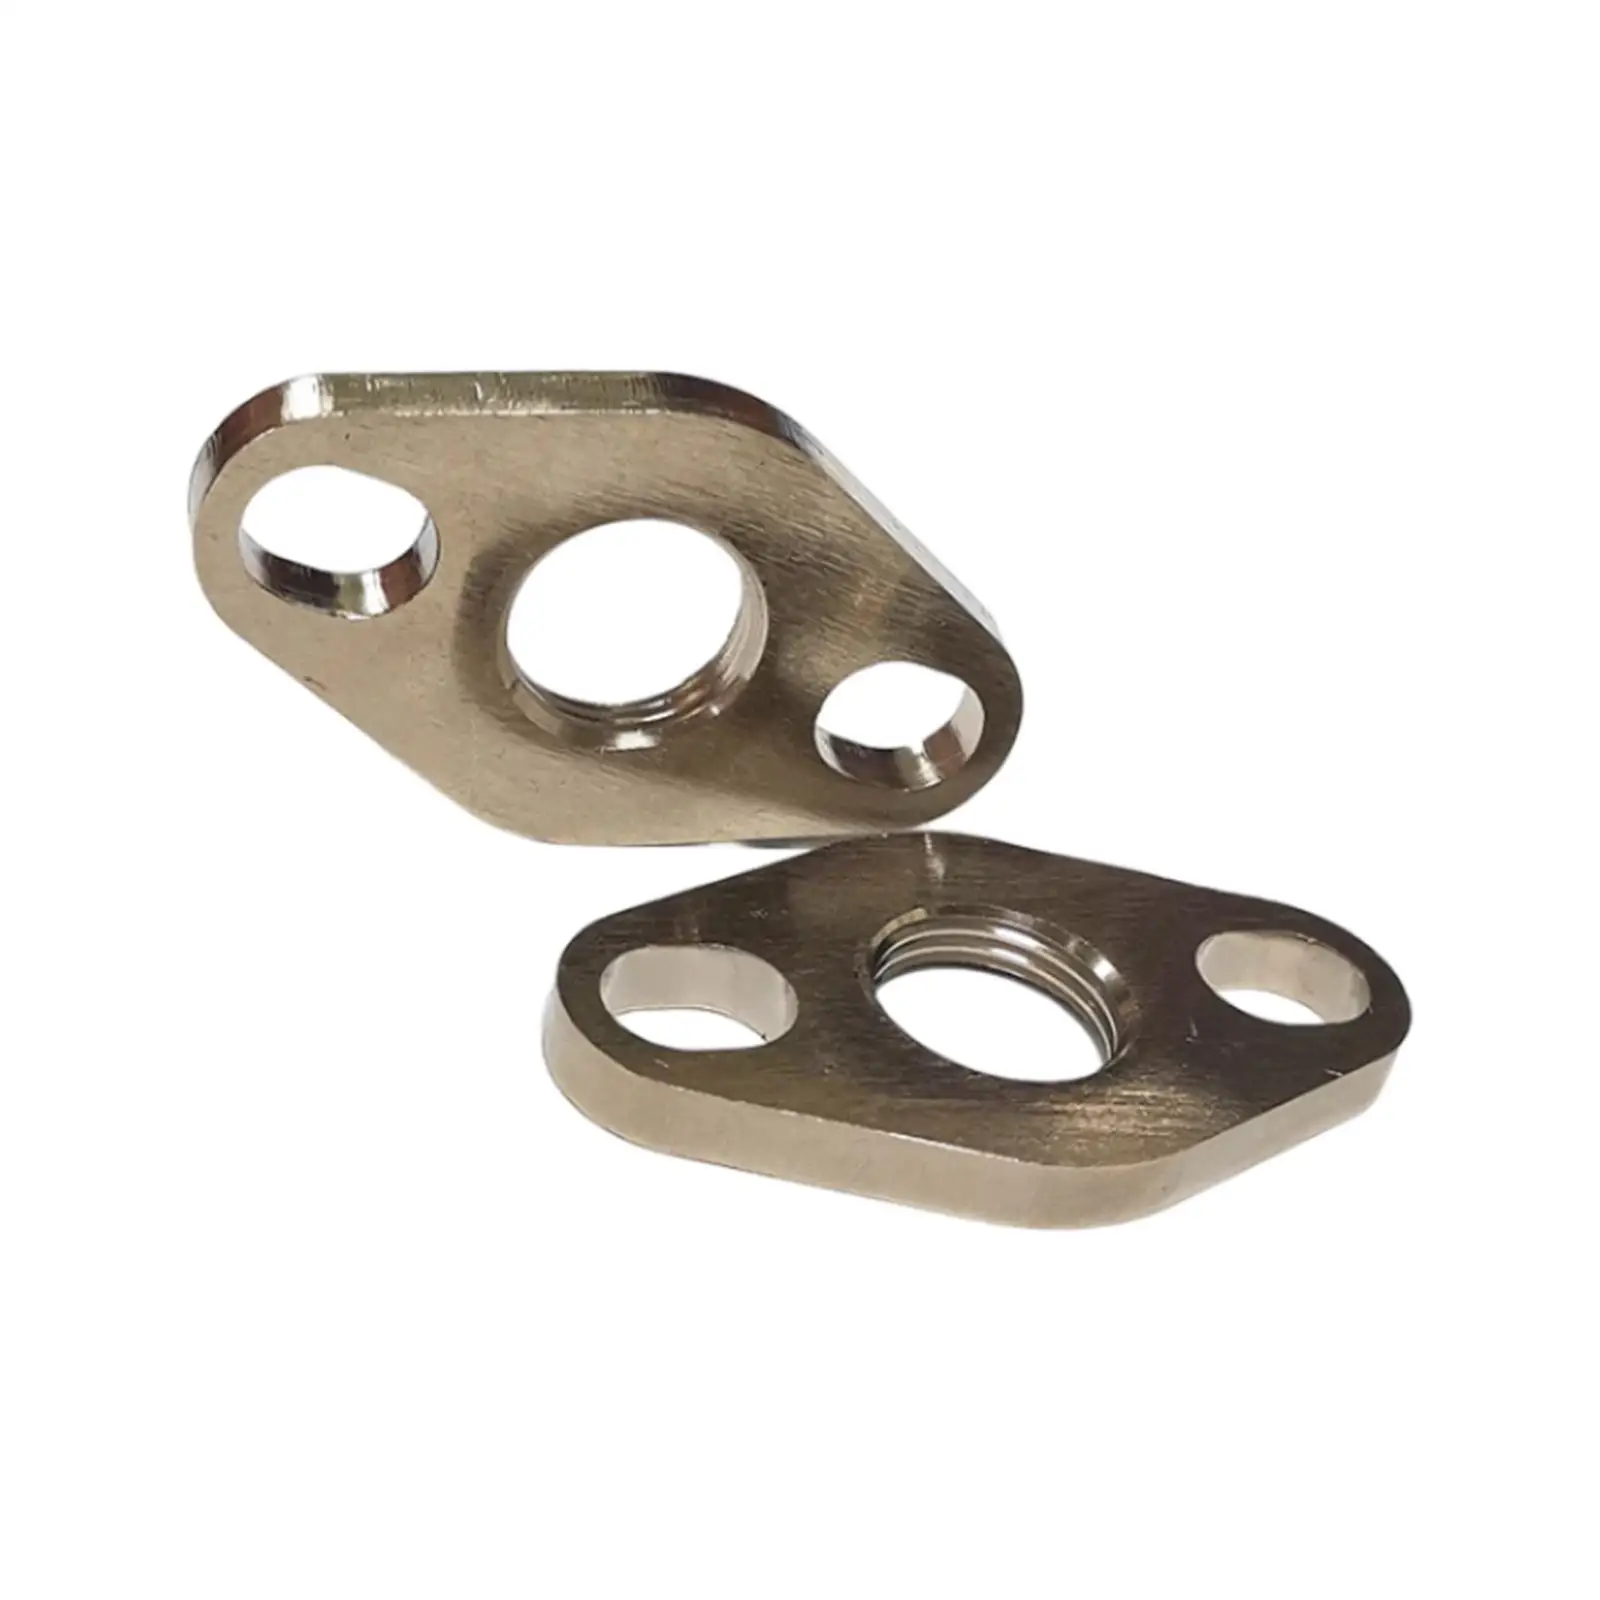 Flange Gasket Durable High Performance Car Accessories Exhaust Pipe Flange Gasket M18x1.5 Replaces for Toyota for tacoma